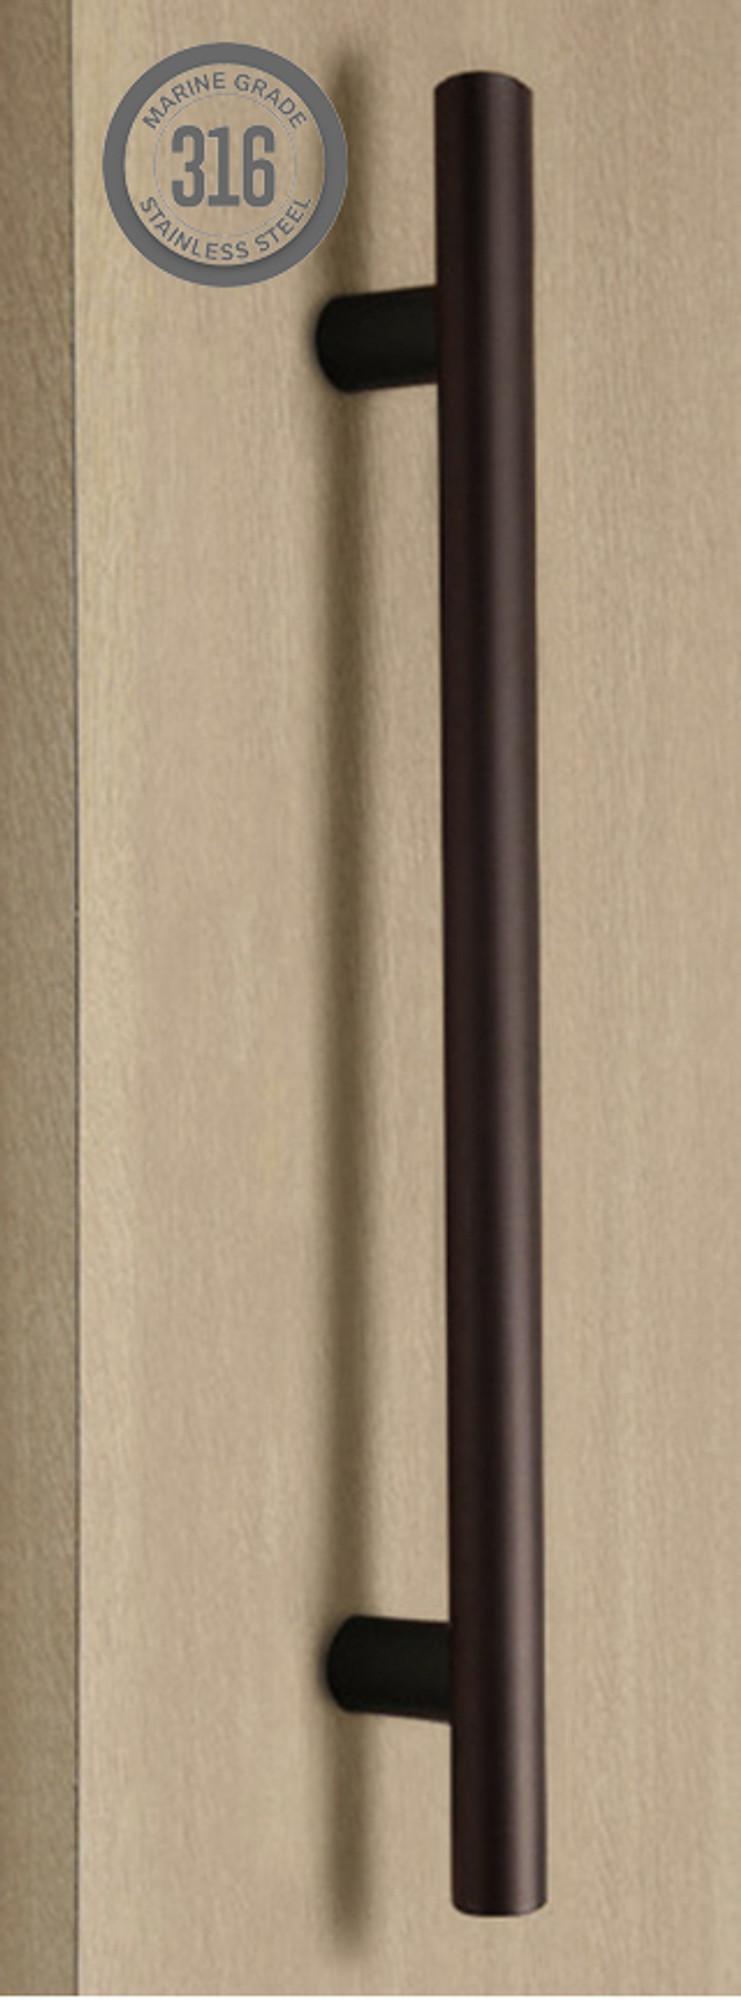 Pro-Line Series: One Sided Ladder Pull Handle, Bronze Powder Coated Finish, 316 Grade Stainless Steel Alloy